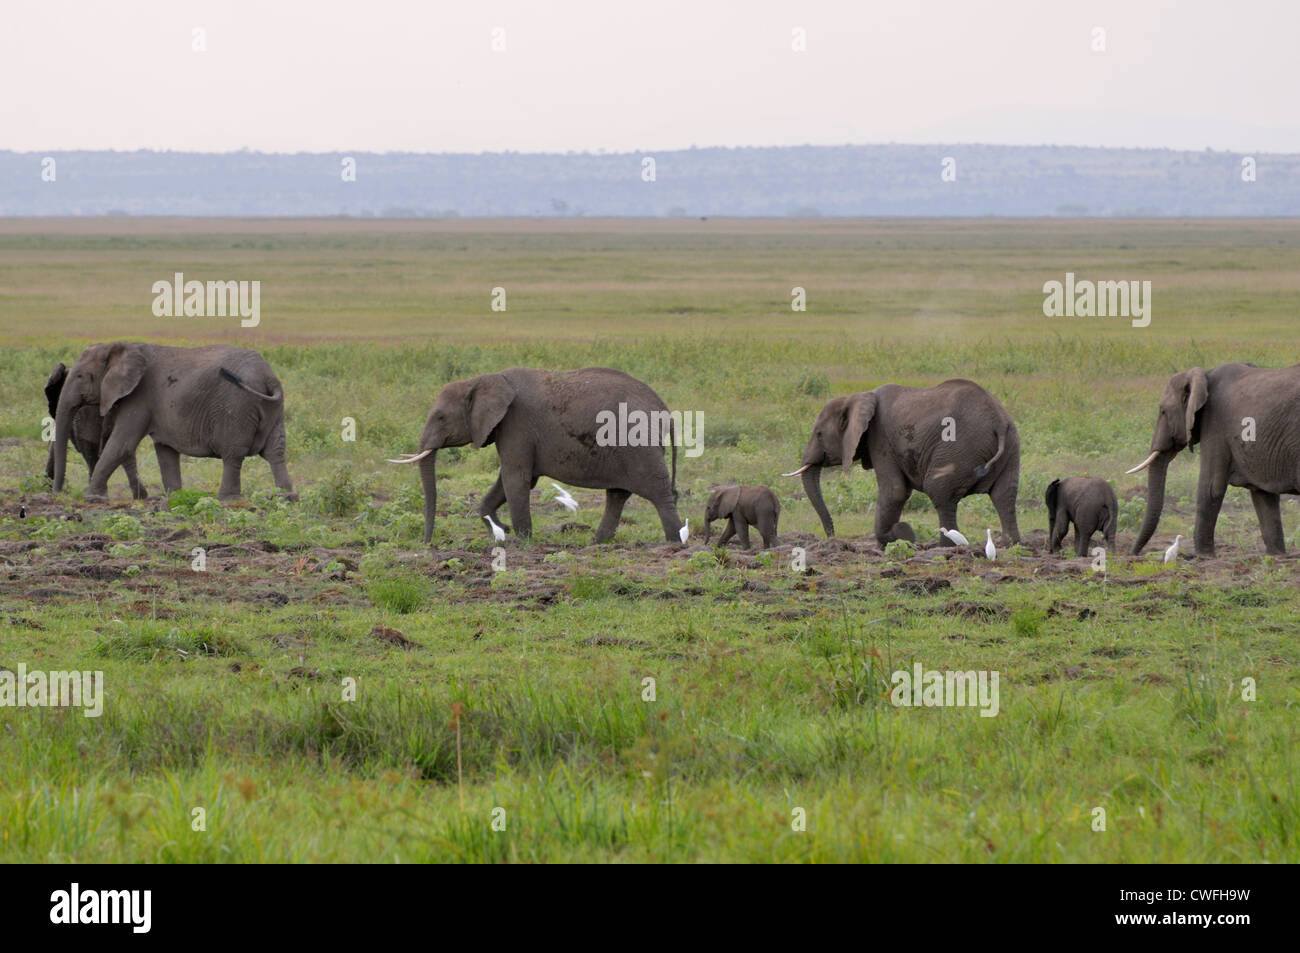 Elephants with Young, following a path Stock Photo